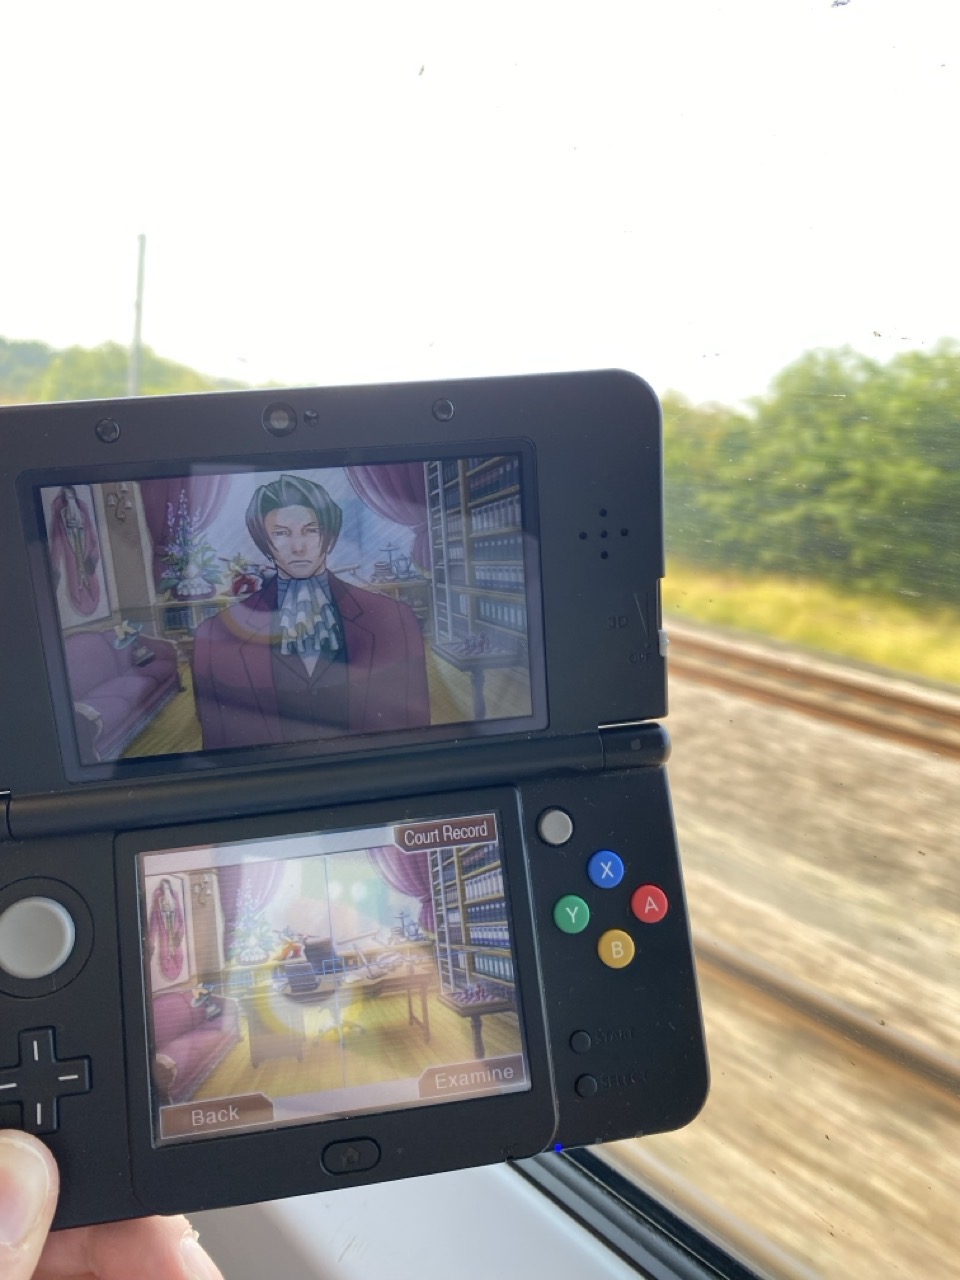 A 3DS running Phoenix Wright, with the view out a train window behind it.